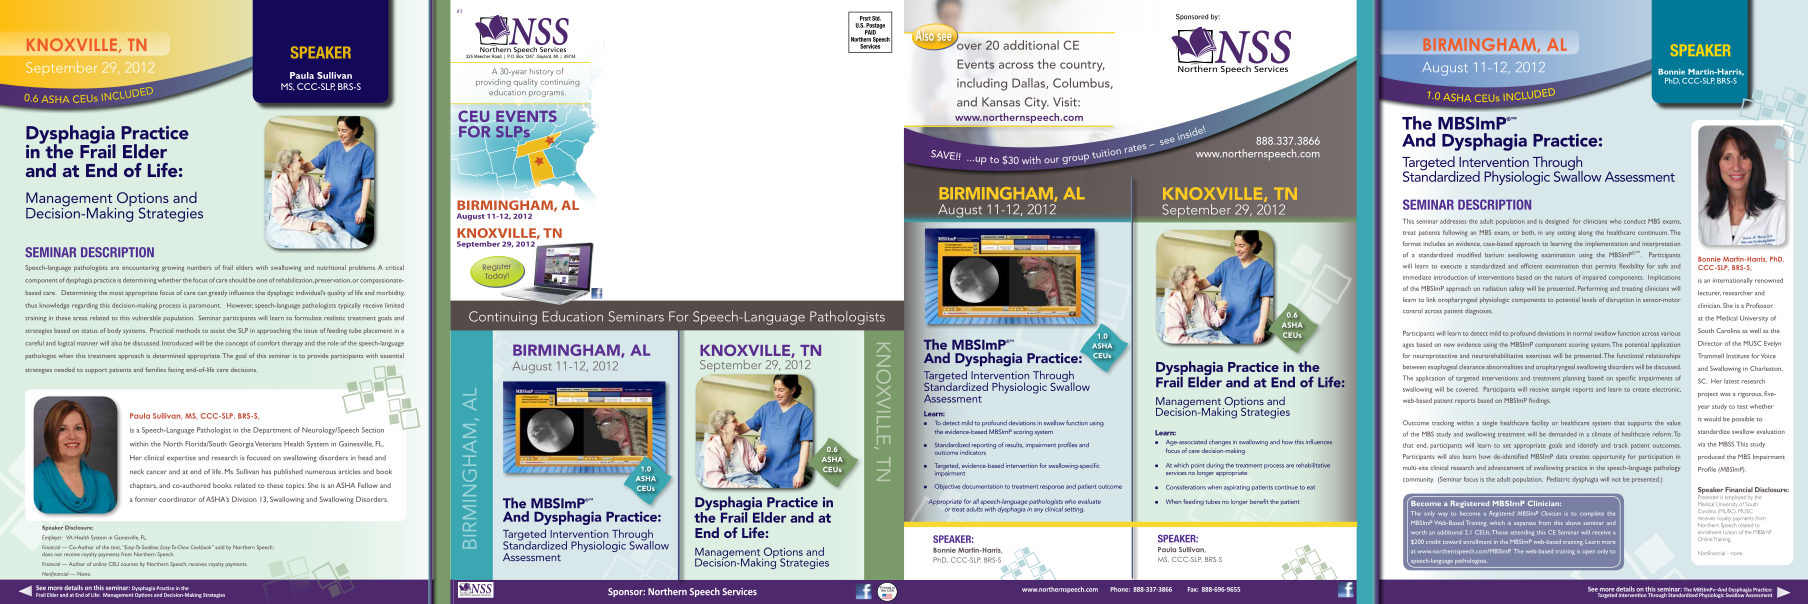 364334768-ceu-events-the-mbsimp-dysphagia-practice-for-slps-and